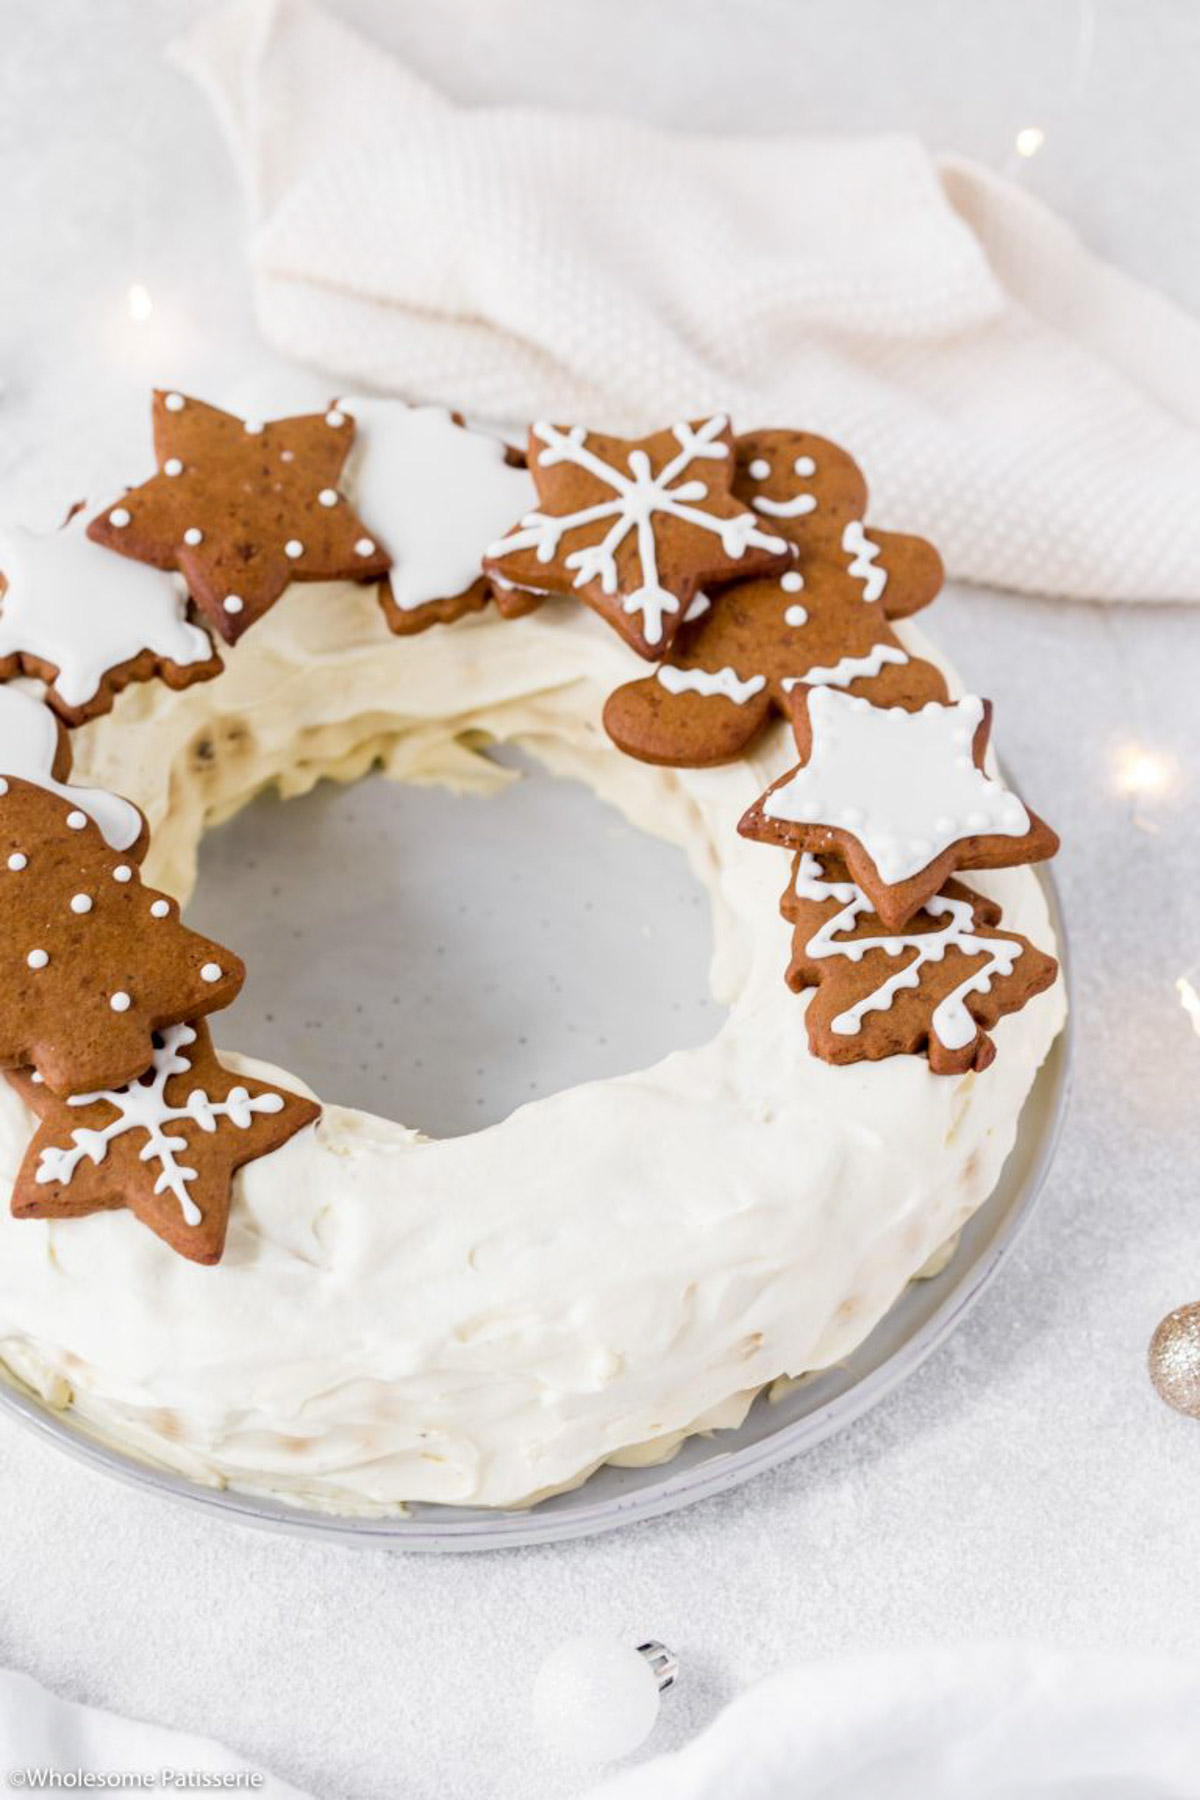 Placing the decorated gingerbread cookies on top of the ripple wreath cake.